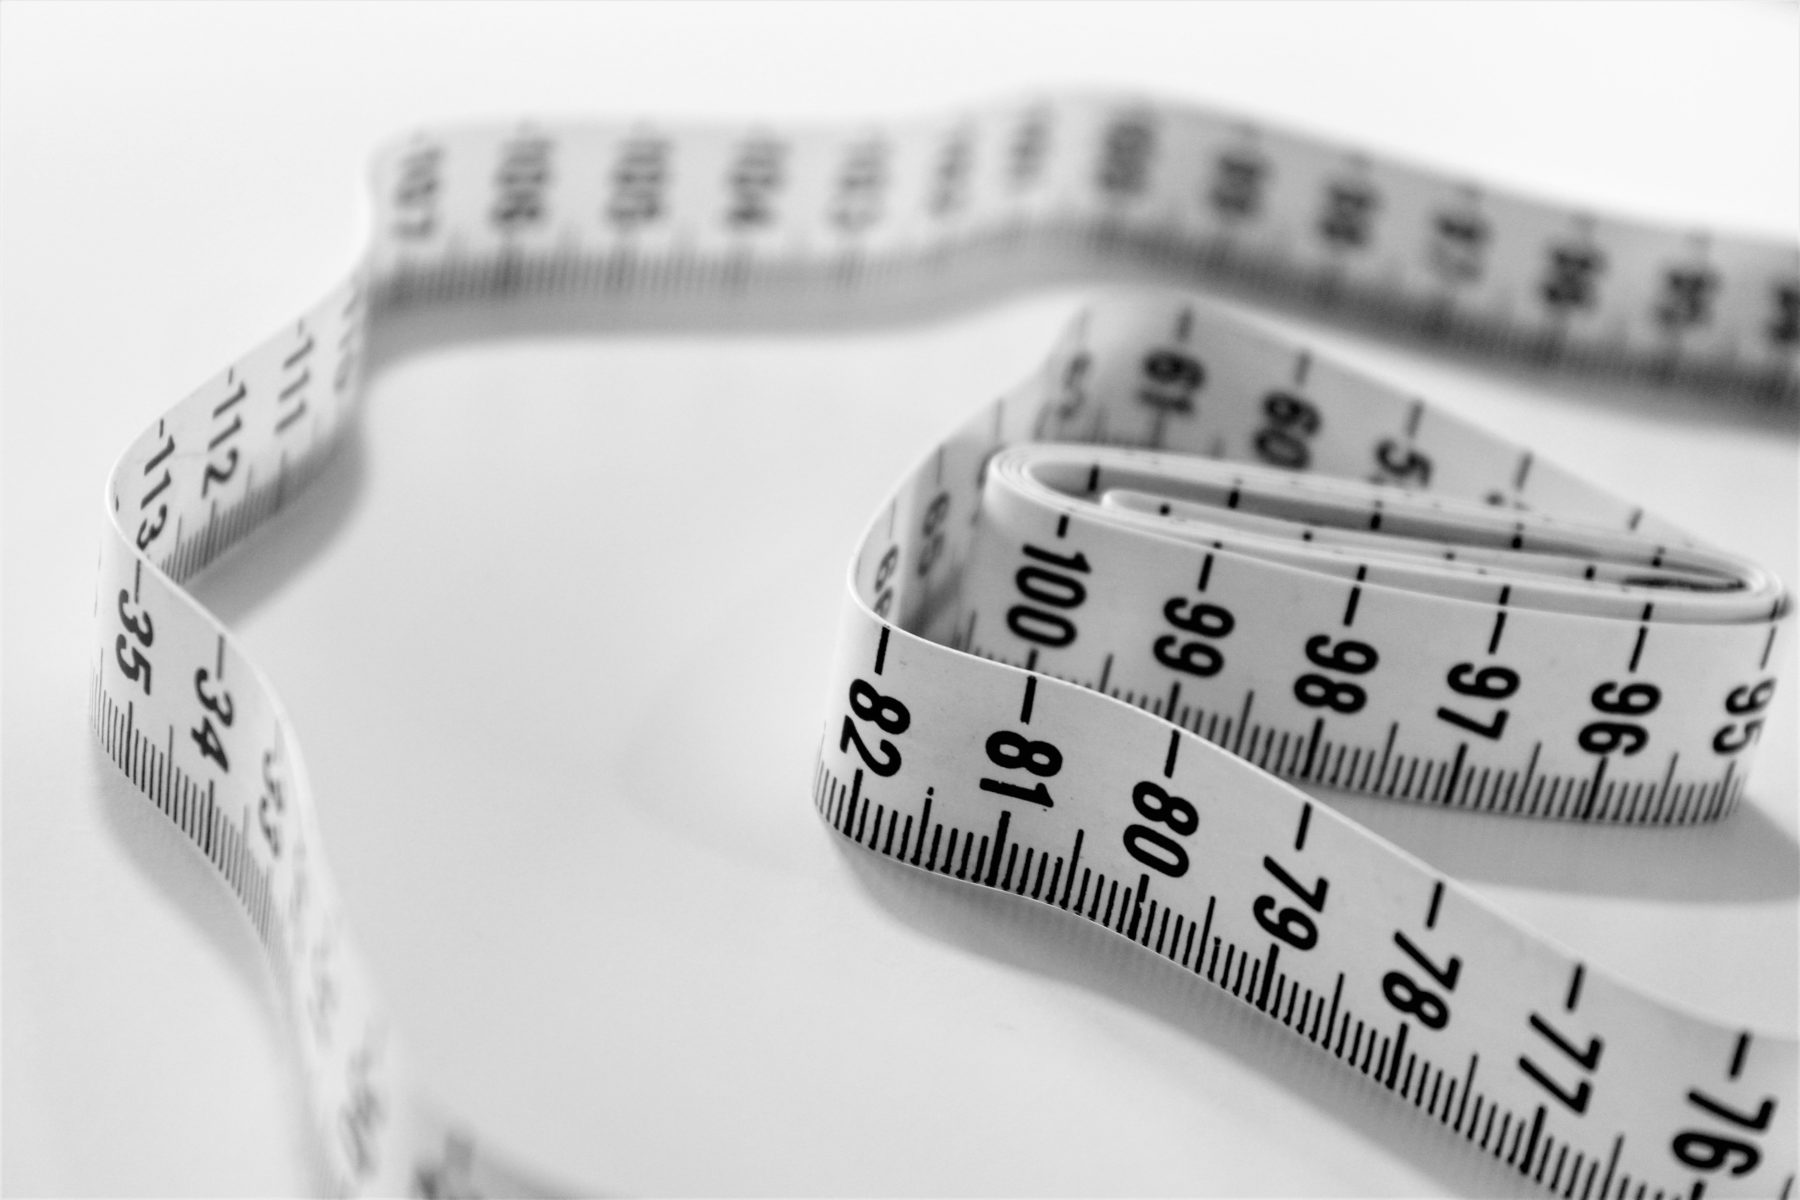 A close up photo of a measuring tape.